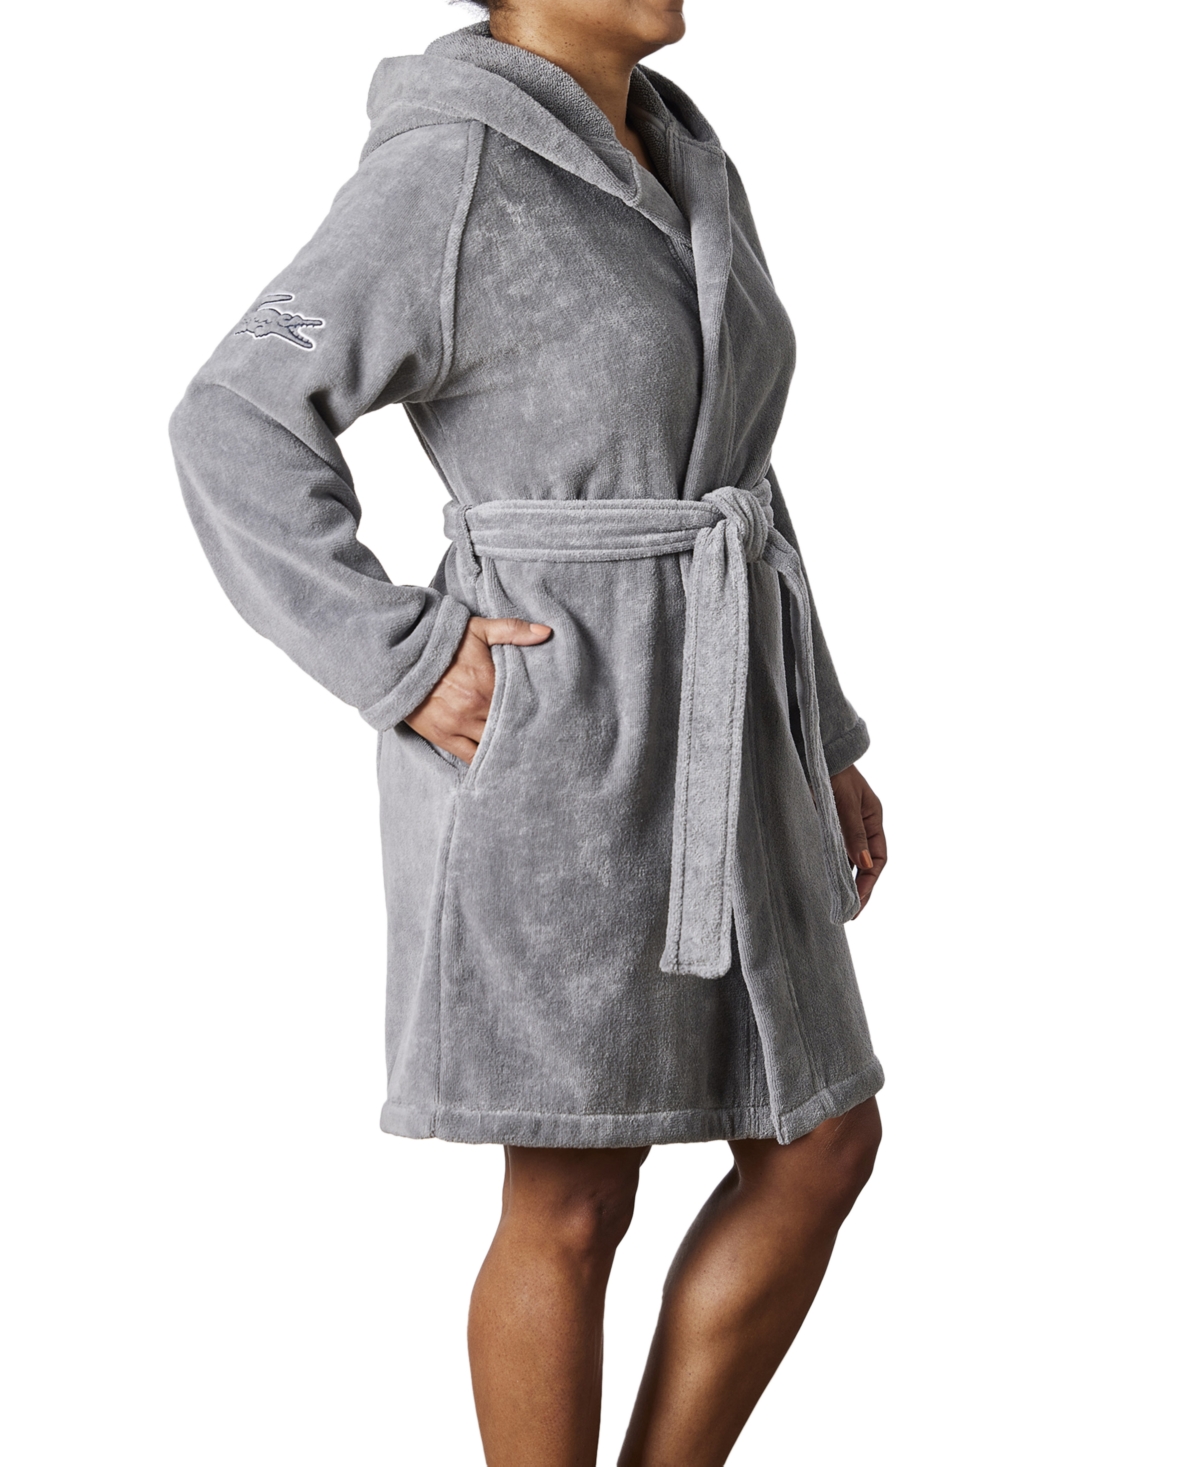 Lacoste Home Fairplay Cotton Bath Robe In Gray